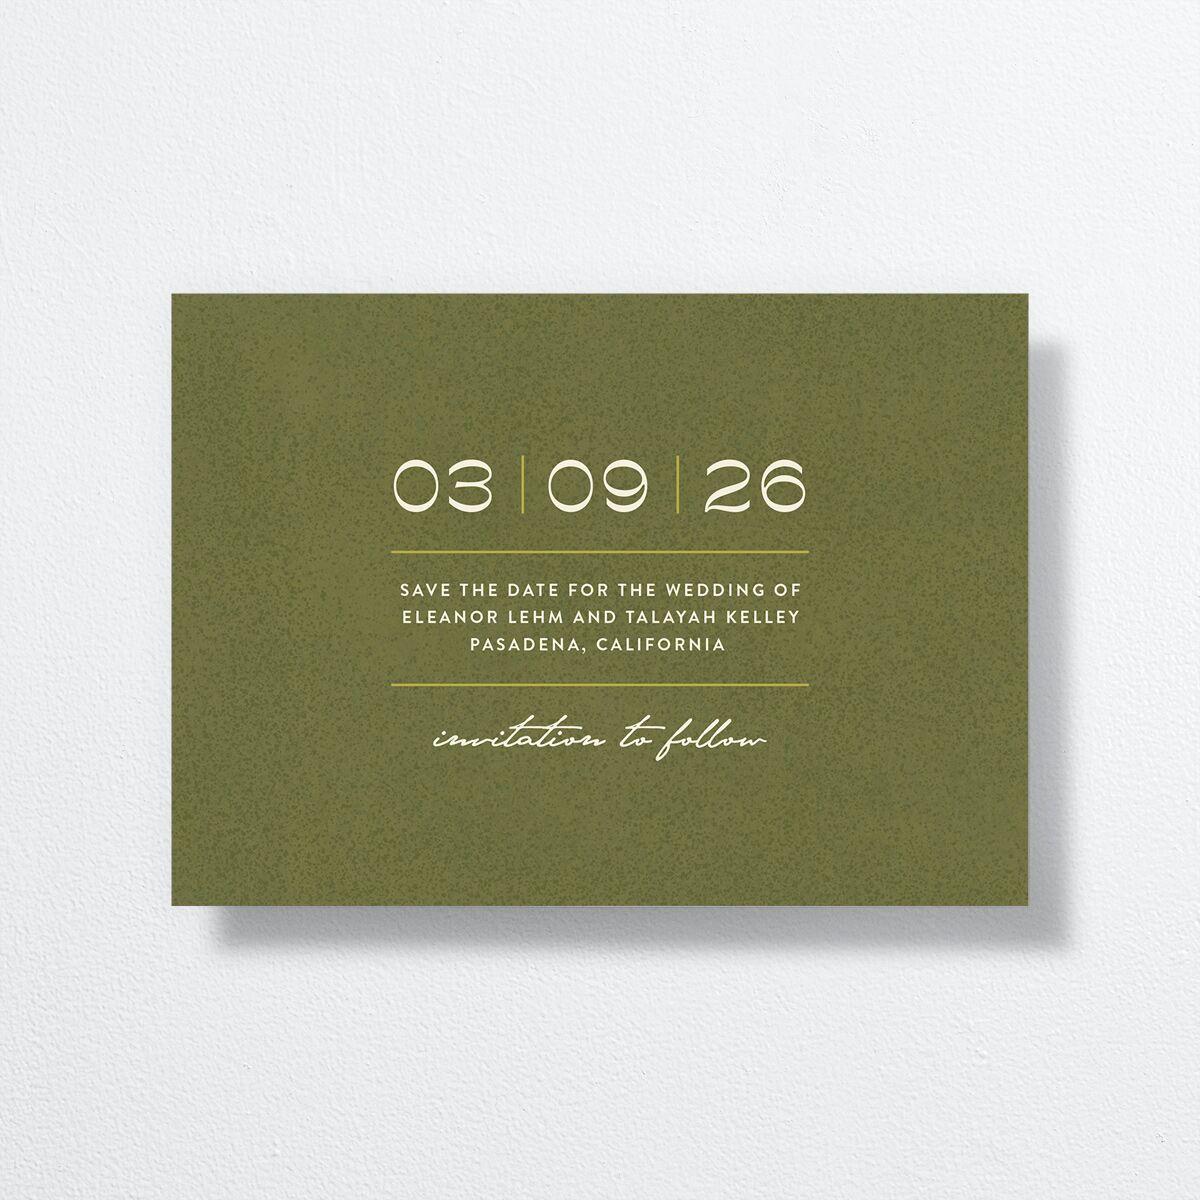 Wildflower Nouveau Save the Date Cards back in Green